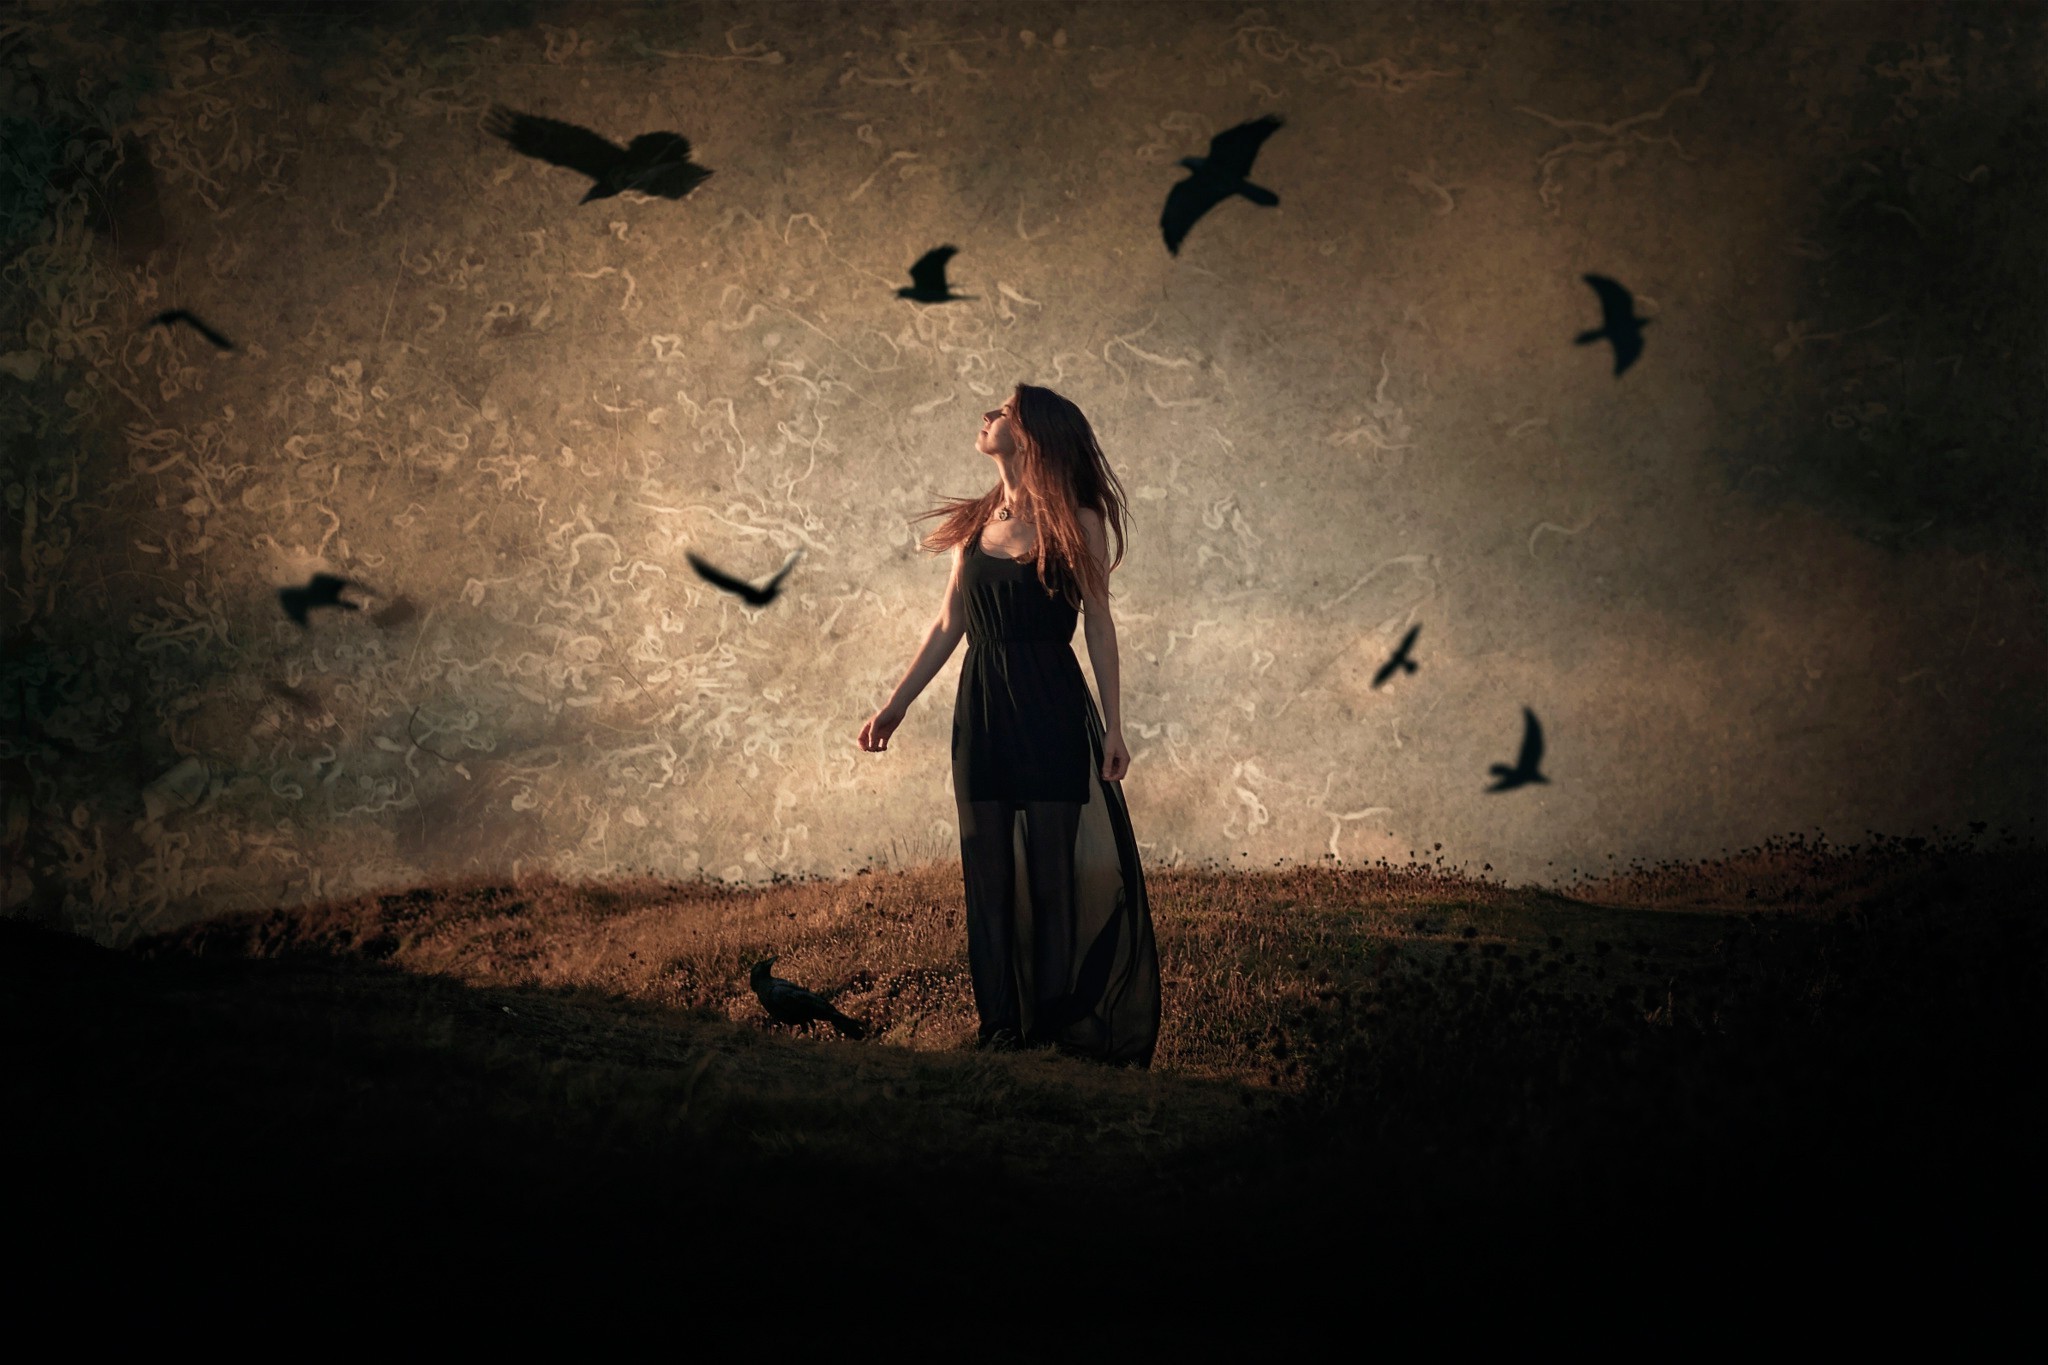 Free photo Ravens circling over a girl in a black dress.